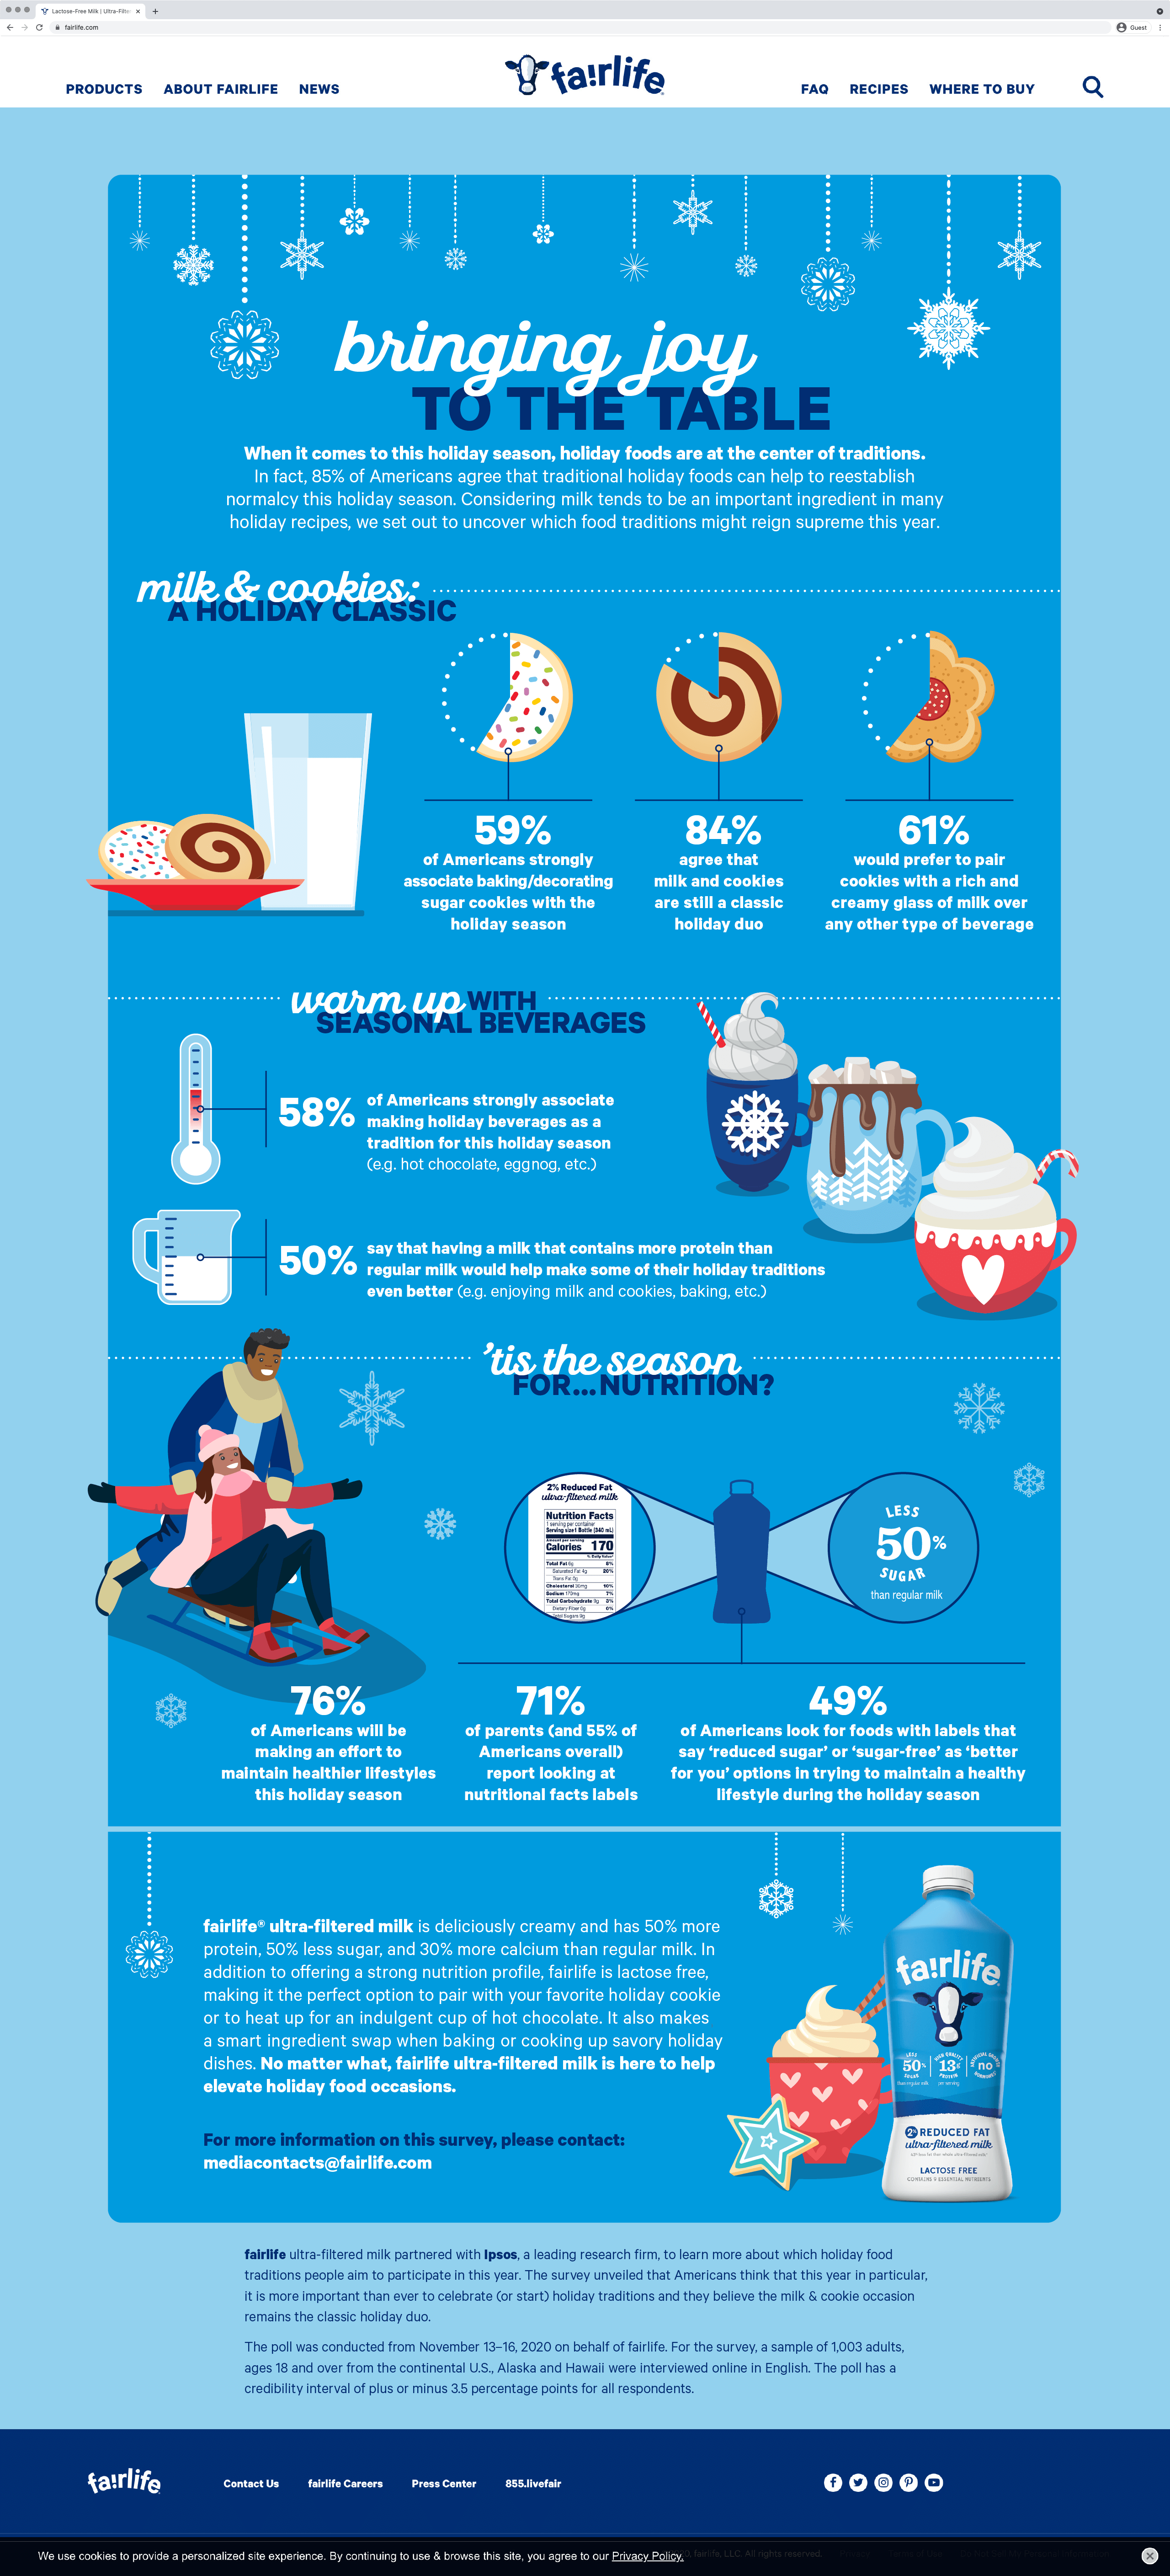 fairlife infographic about holiday cookies, milk and healthy holiday beverages